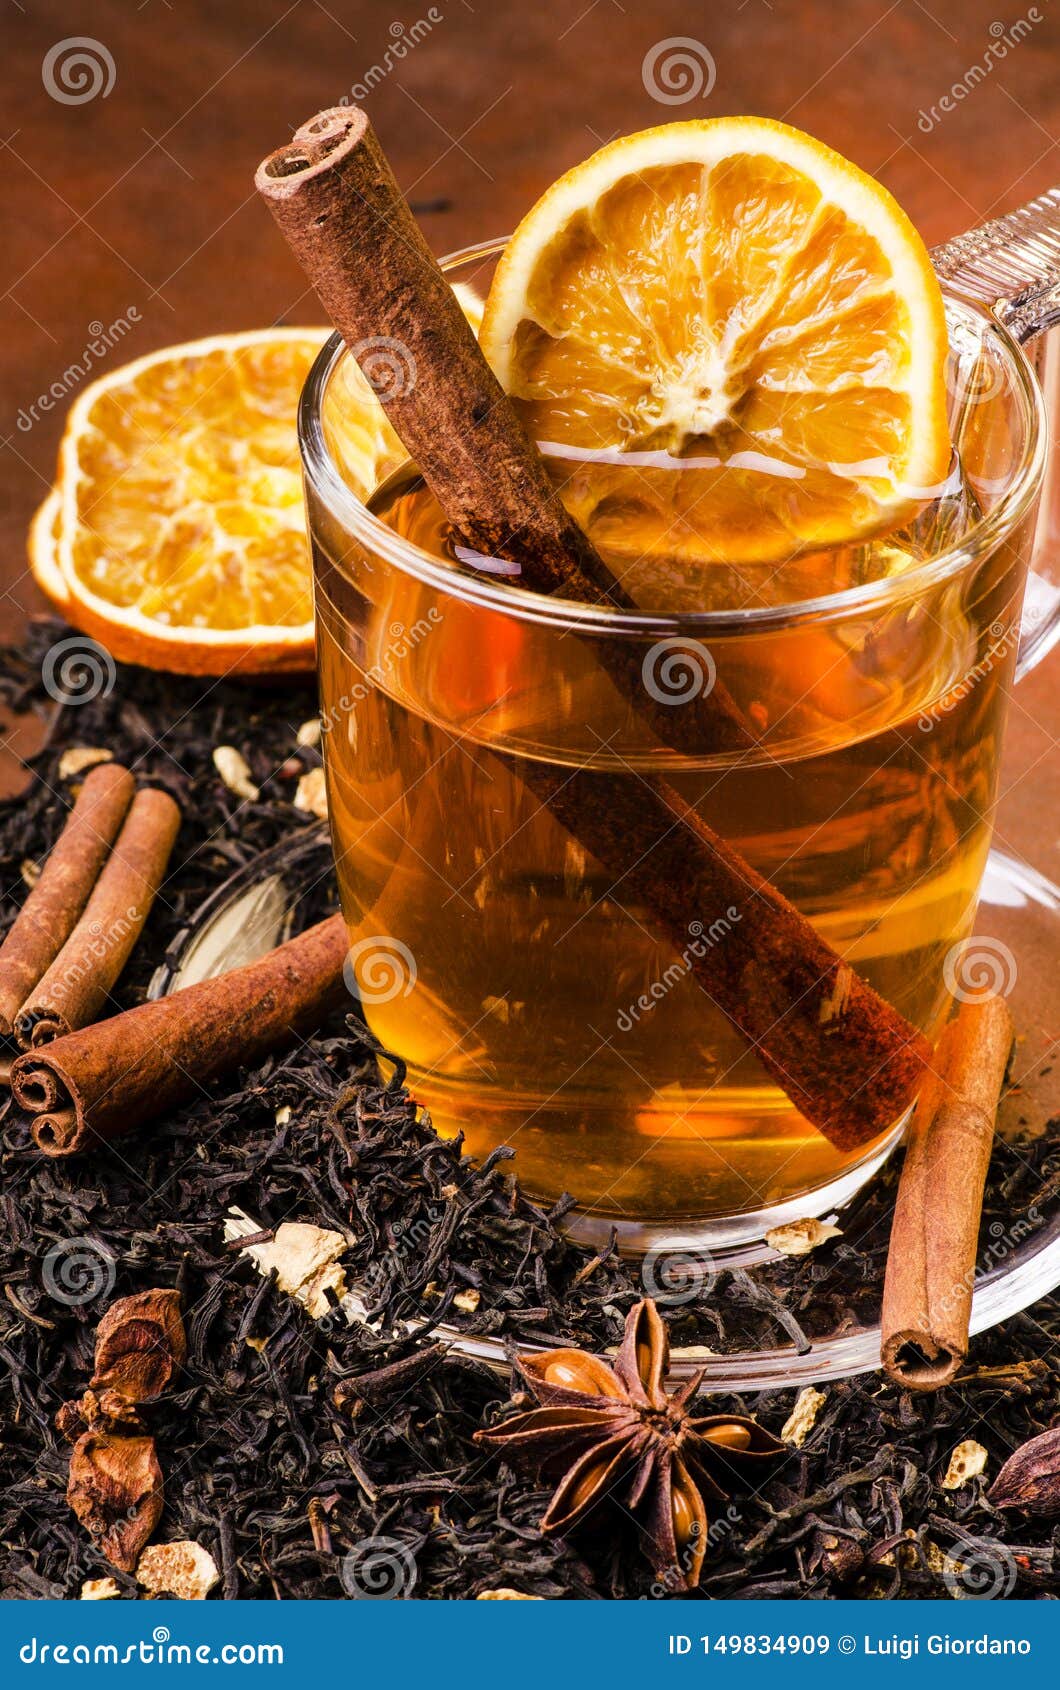 Cup of Black Tea with Aromas Stock Image - Image of tradition ...